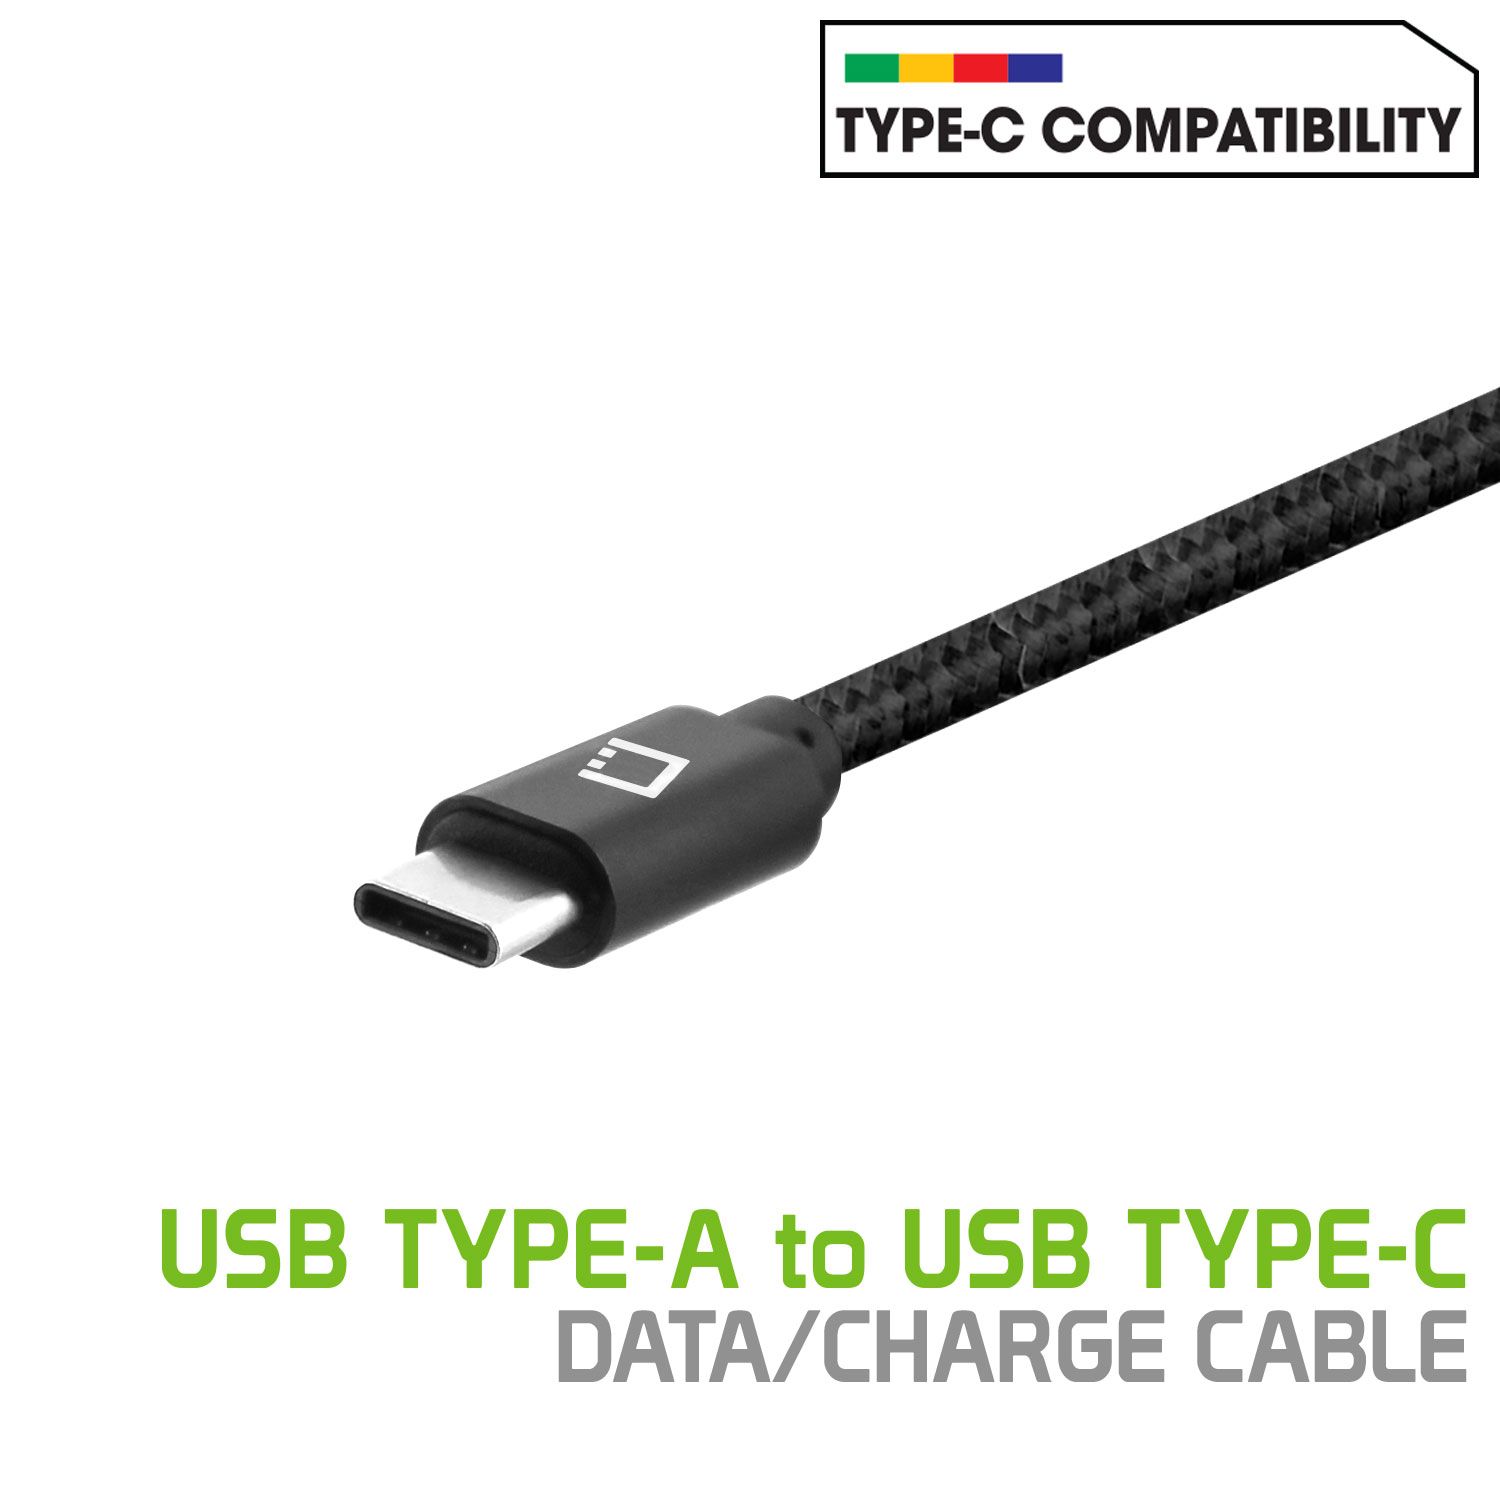 Cellet USB Cable Compatible with LG K51, Heavy Duty Braided USB Type C (USB-C to USB-A) Fast Charging Sync Cable (4 feet/1.2 meters) and Atom Wipe - image 2 of 8